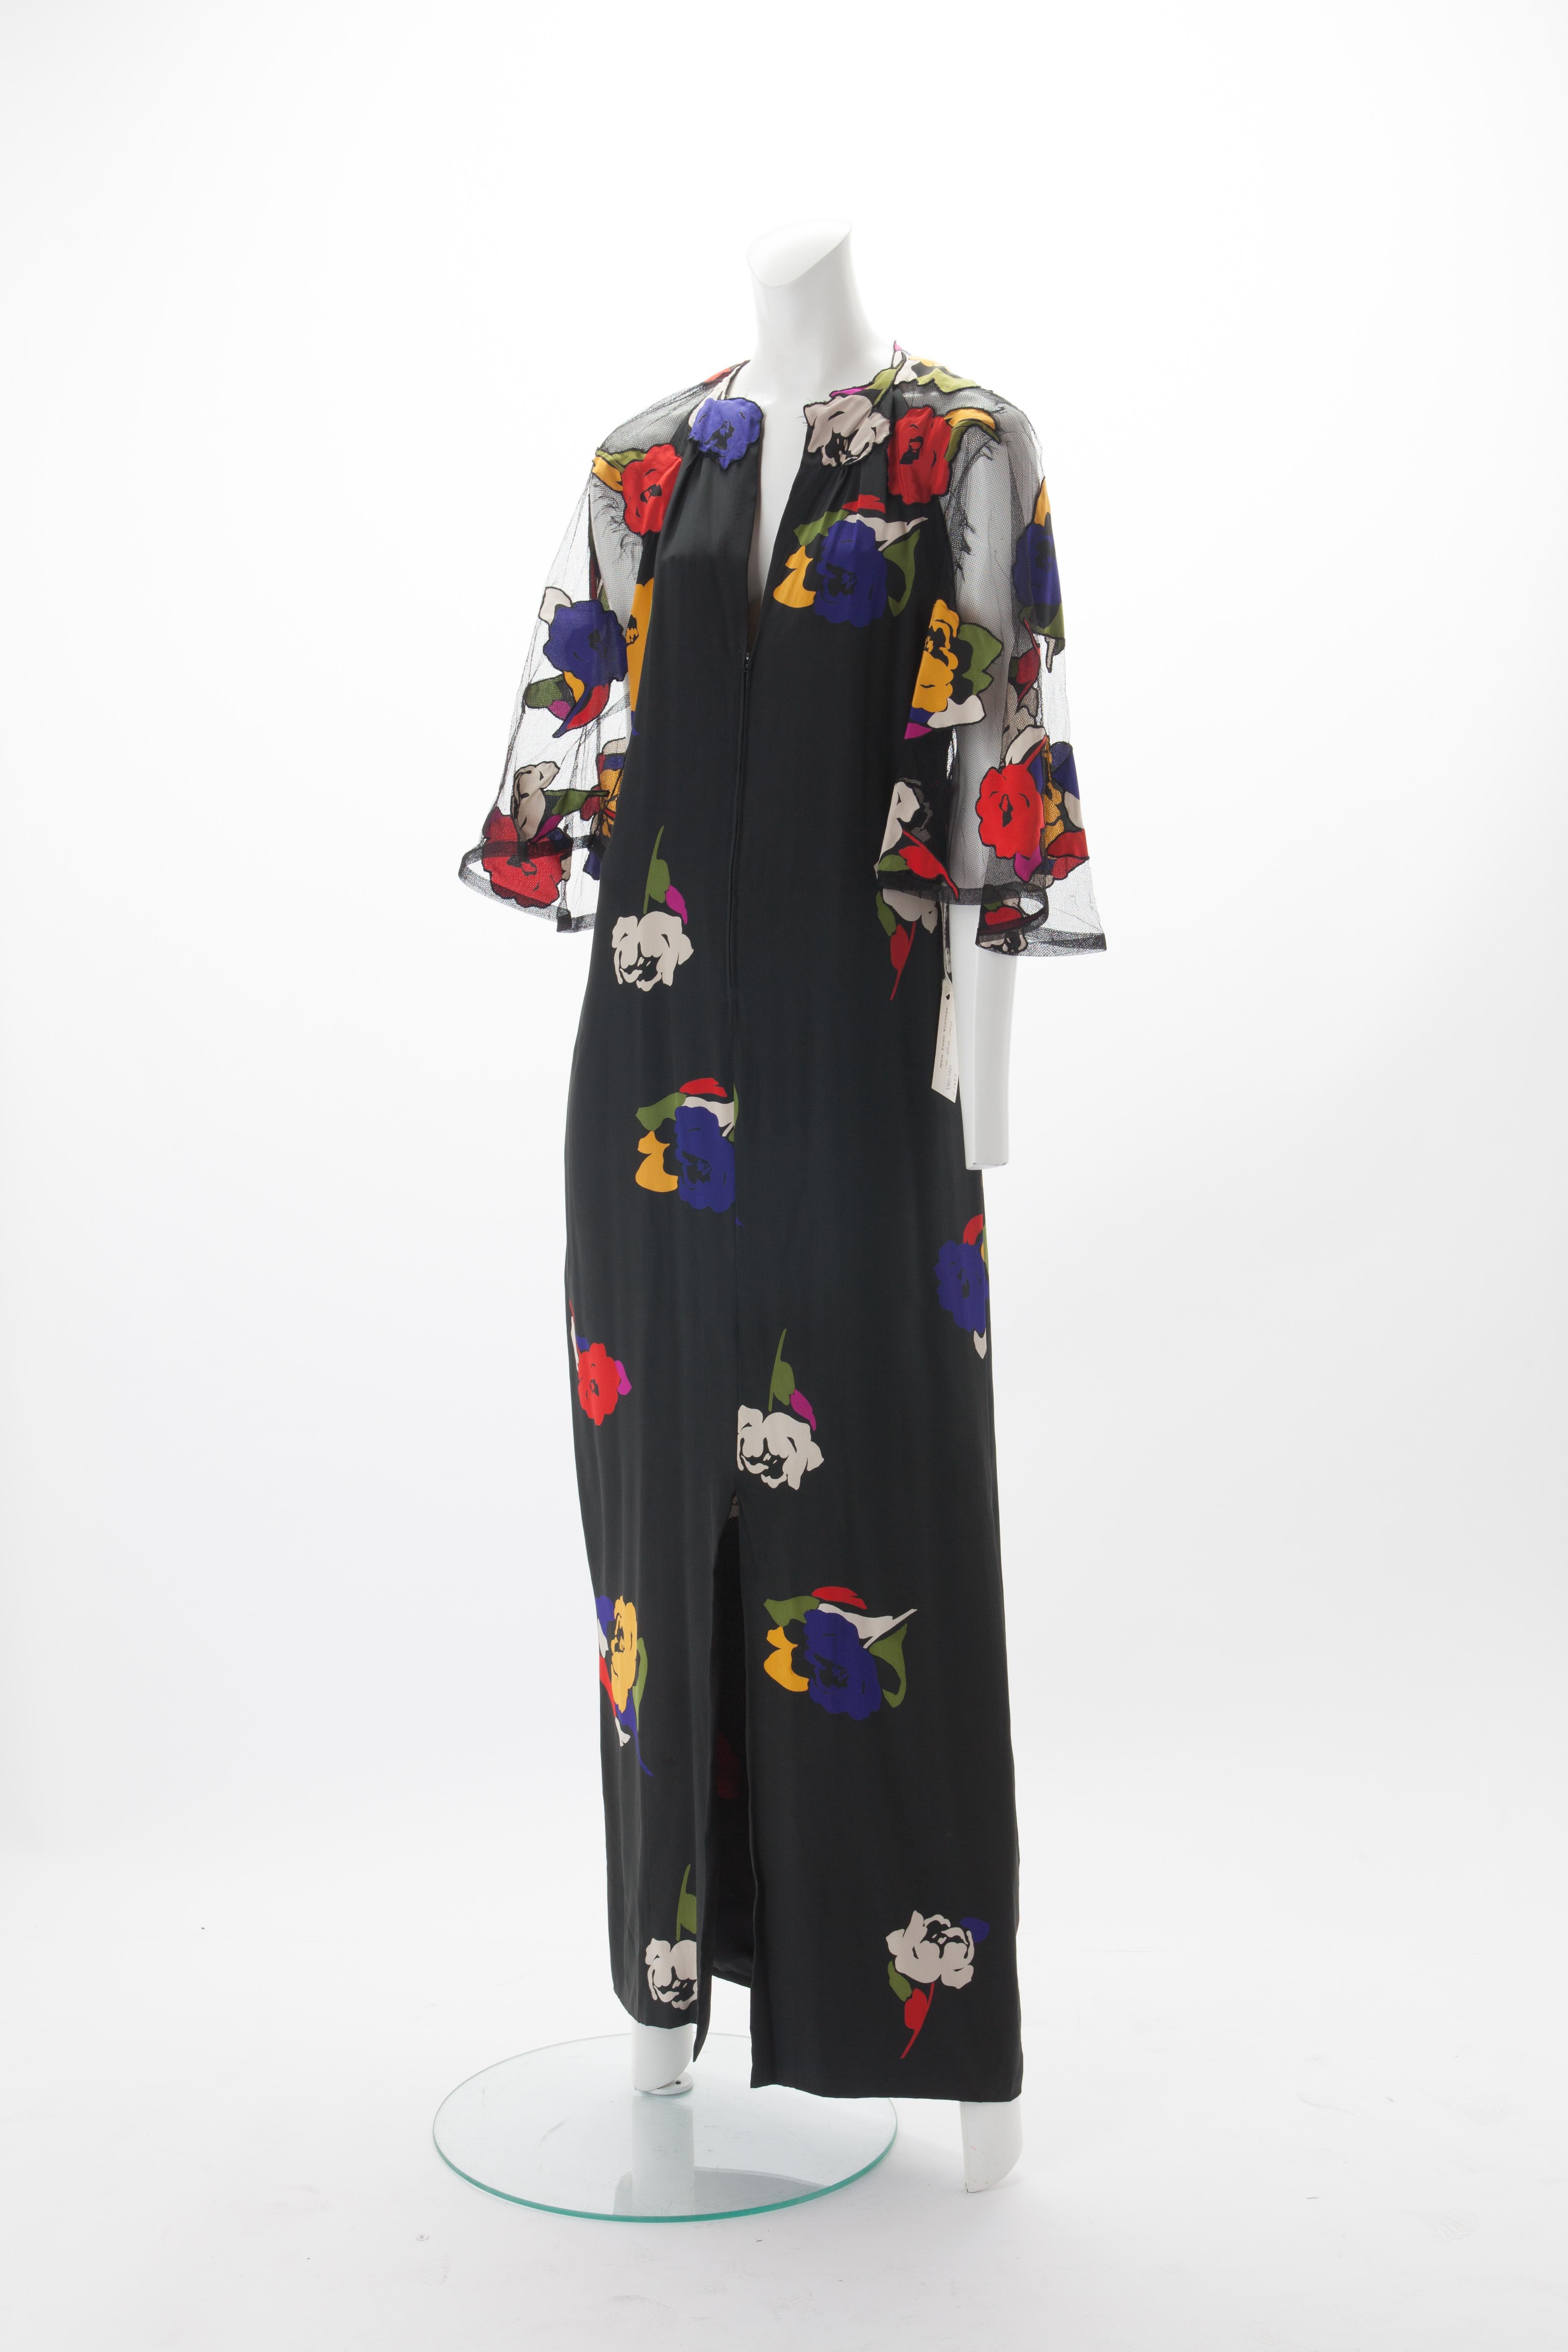 Pauline Trigère Silk and Net Gown with Floral Appliqués c.1970s.
Full length flowy dress with net bell sleeves and floral silk appliqués. Zipper at neckline and slit at center front. Features low-cut net back.   
Fits US 4 to 8. 